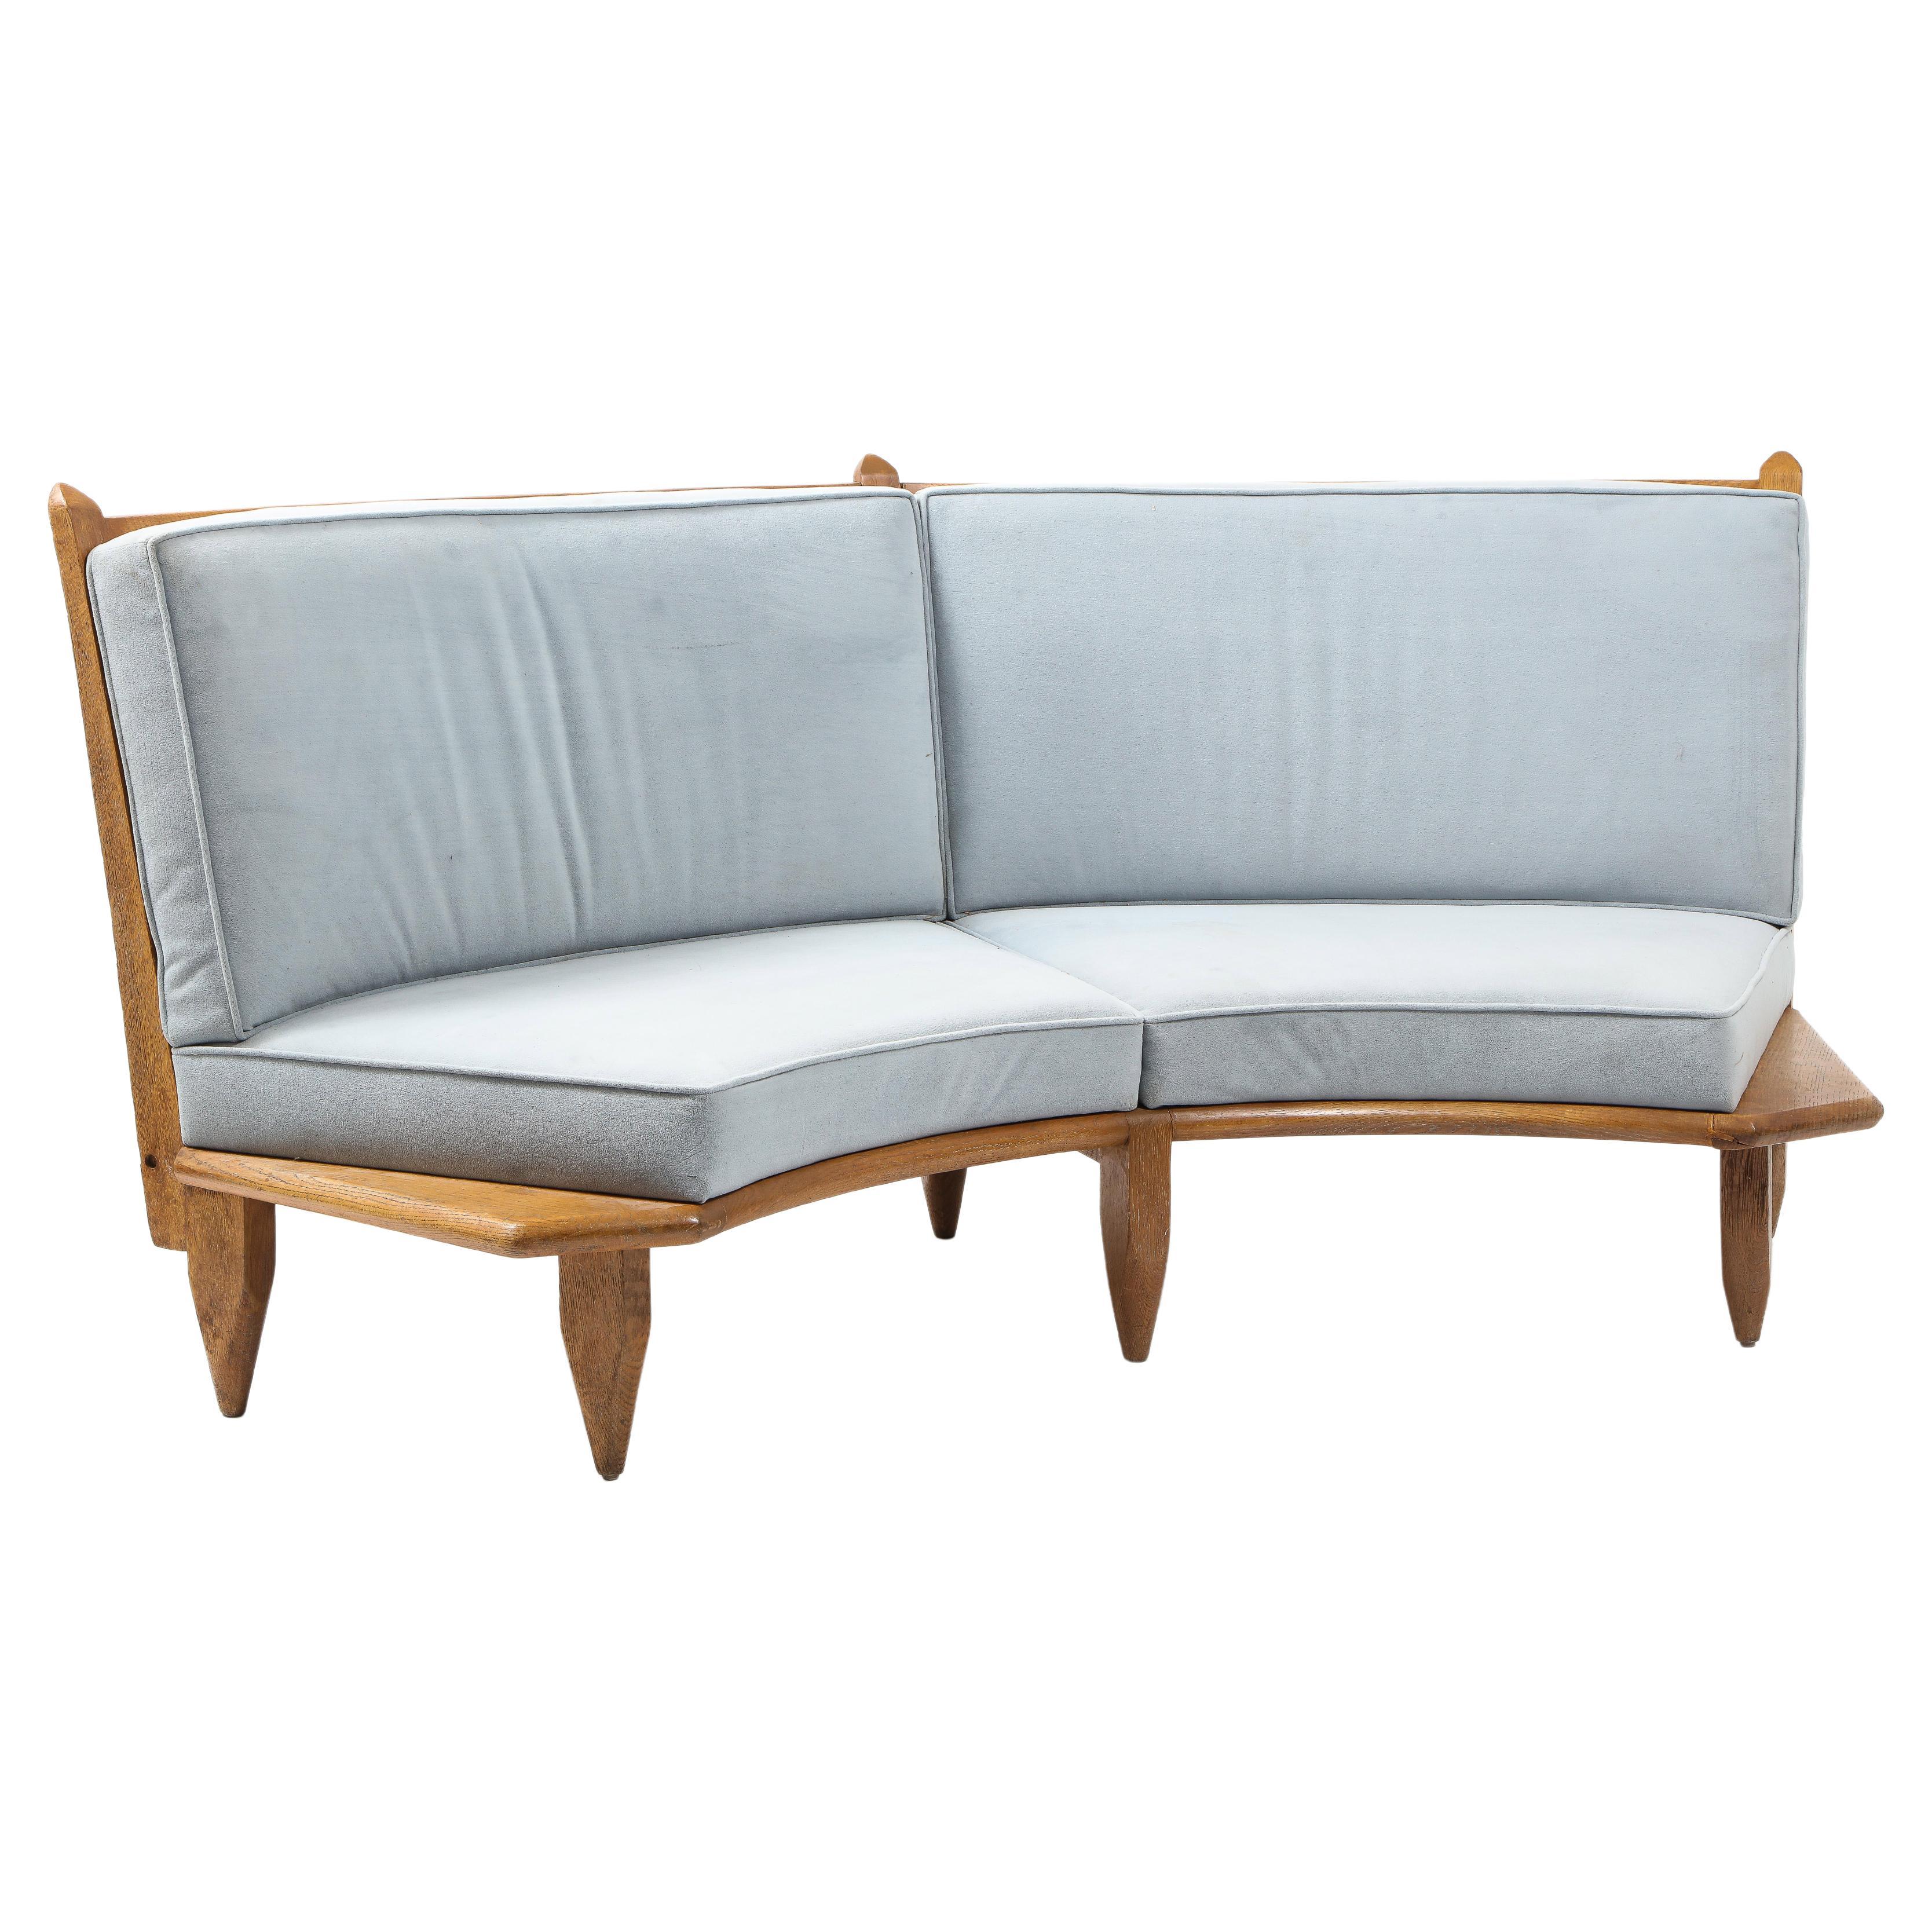 Unusual oak sofa by Guillerme & Chambron for Votre Maison. The frame has the usual hallmarks of their production with the extended end and thick pencil-shaped legs with a curved back and vertical dowels holding the cushion. In great conditions with